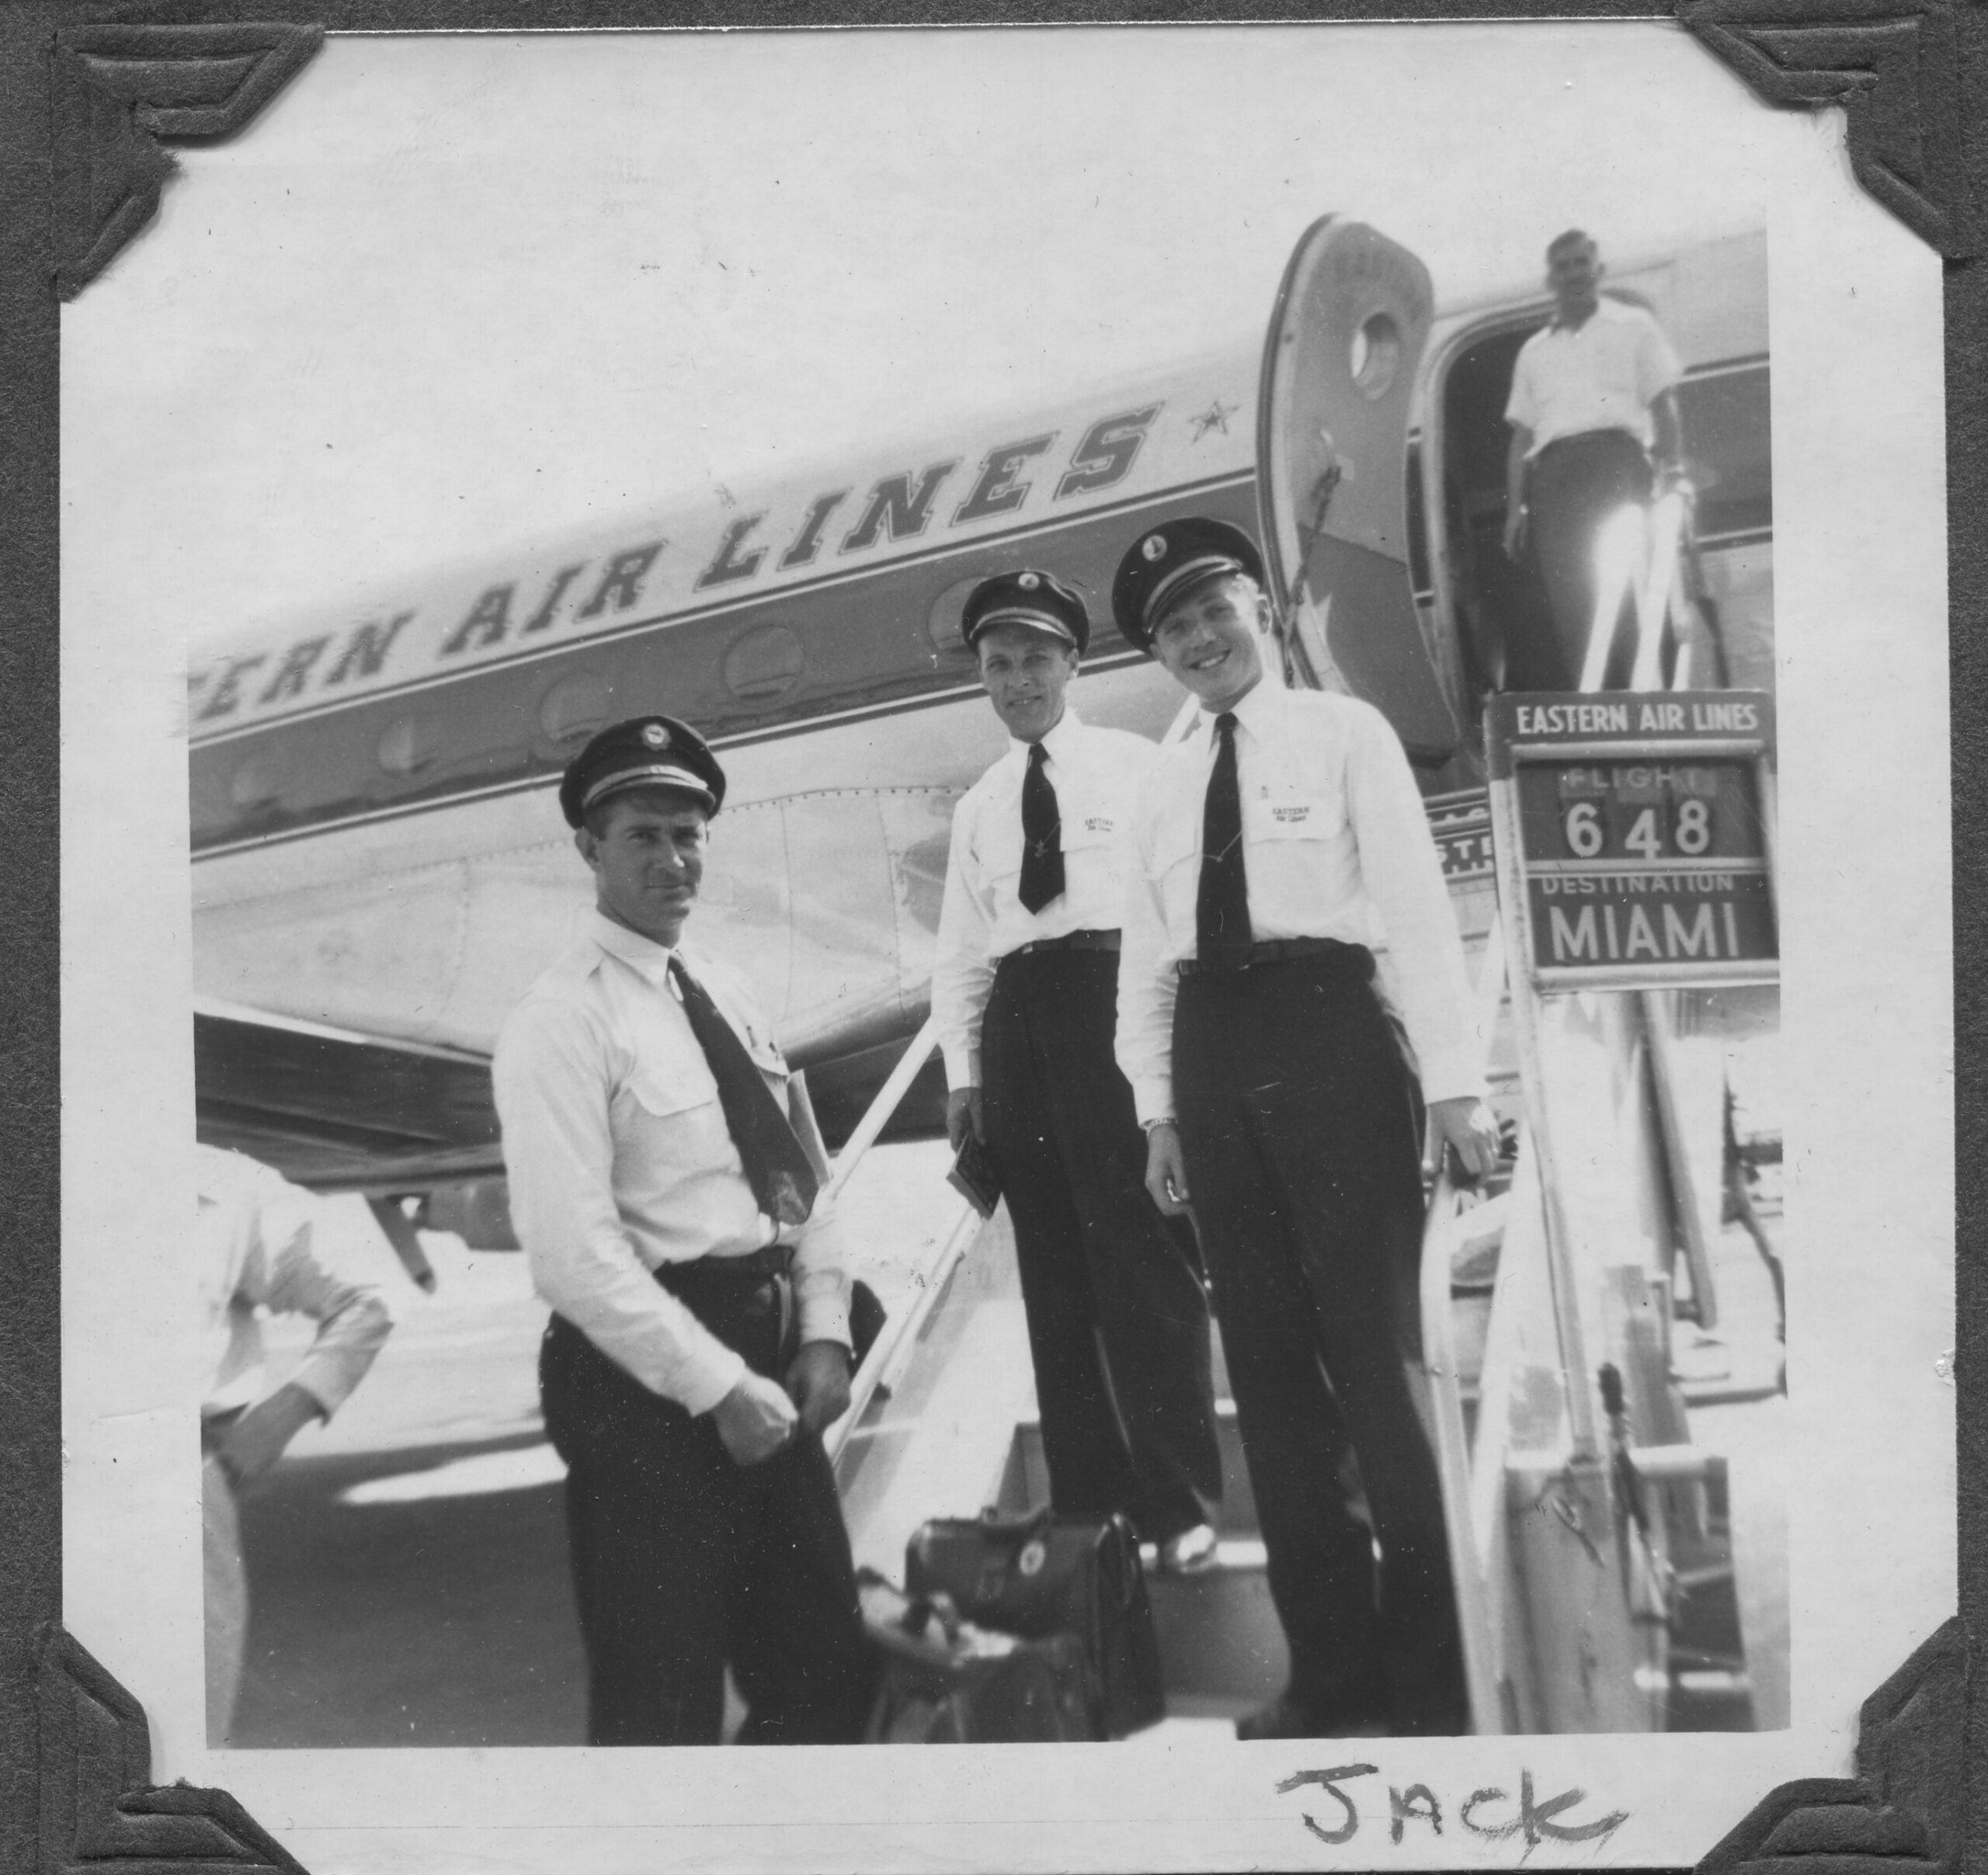 A black and white photo of three men in Eastern Airline Flight attendant uniforms standing in front of a plane at Miami International Airport, 1940s.